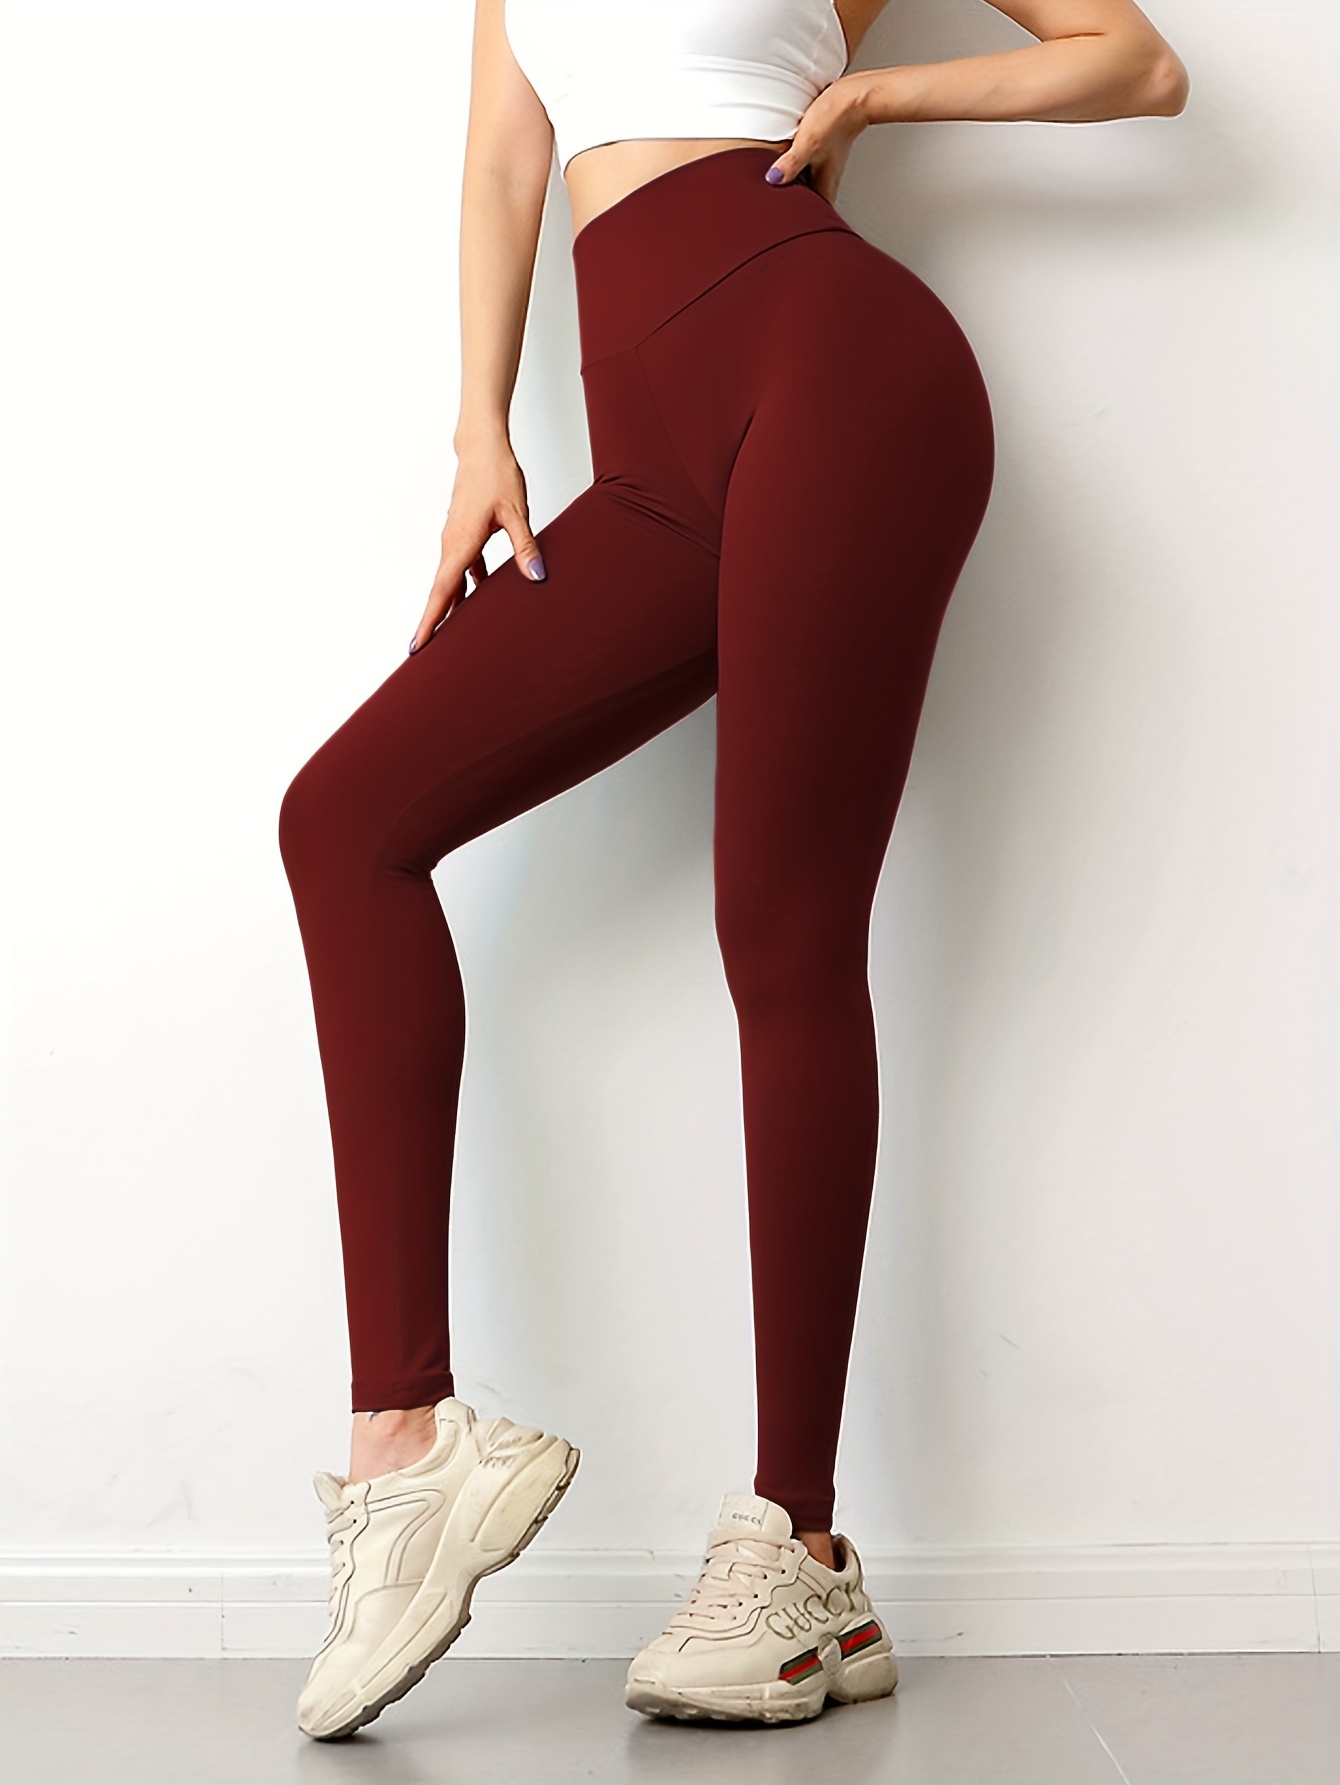 Buy Taggd Women Maroon Color Leggings With Crop Top Yoga Suit